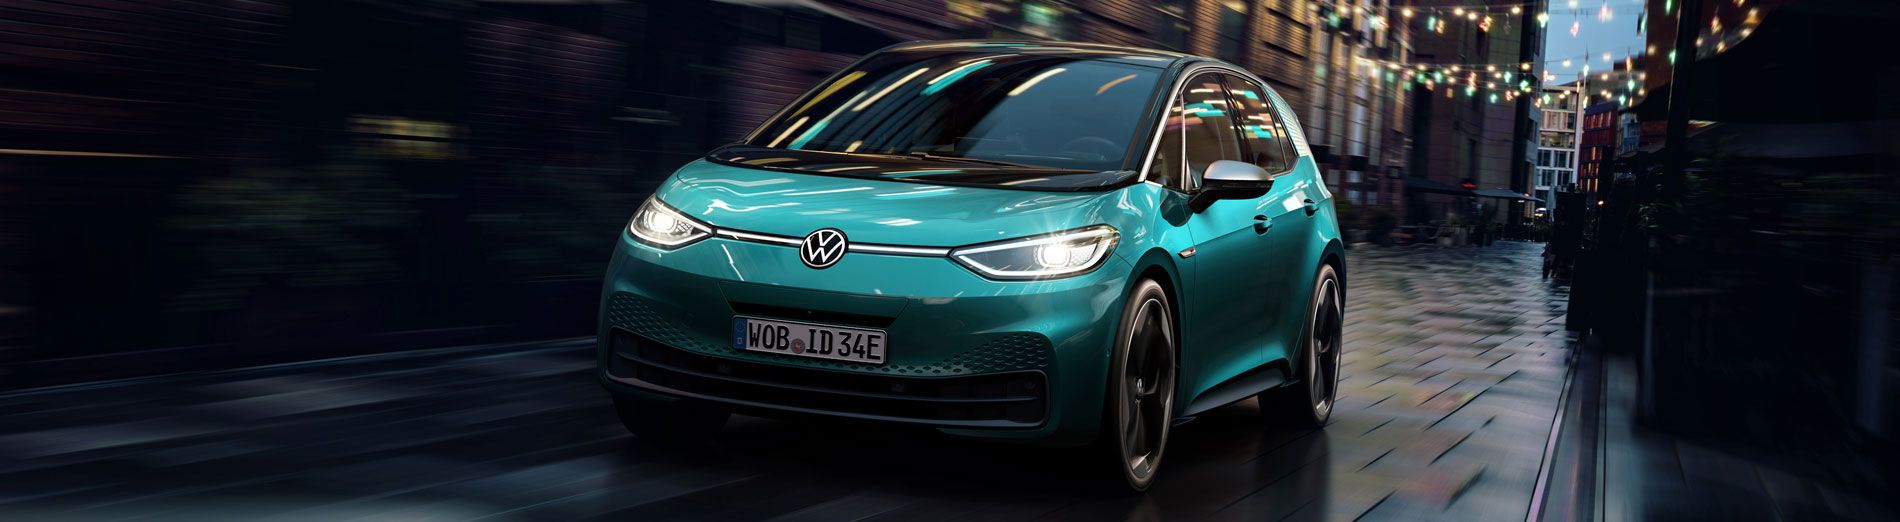 2020 brings 34 new model launches from Volkswagen!